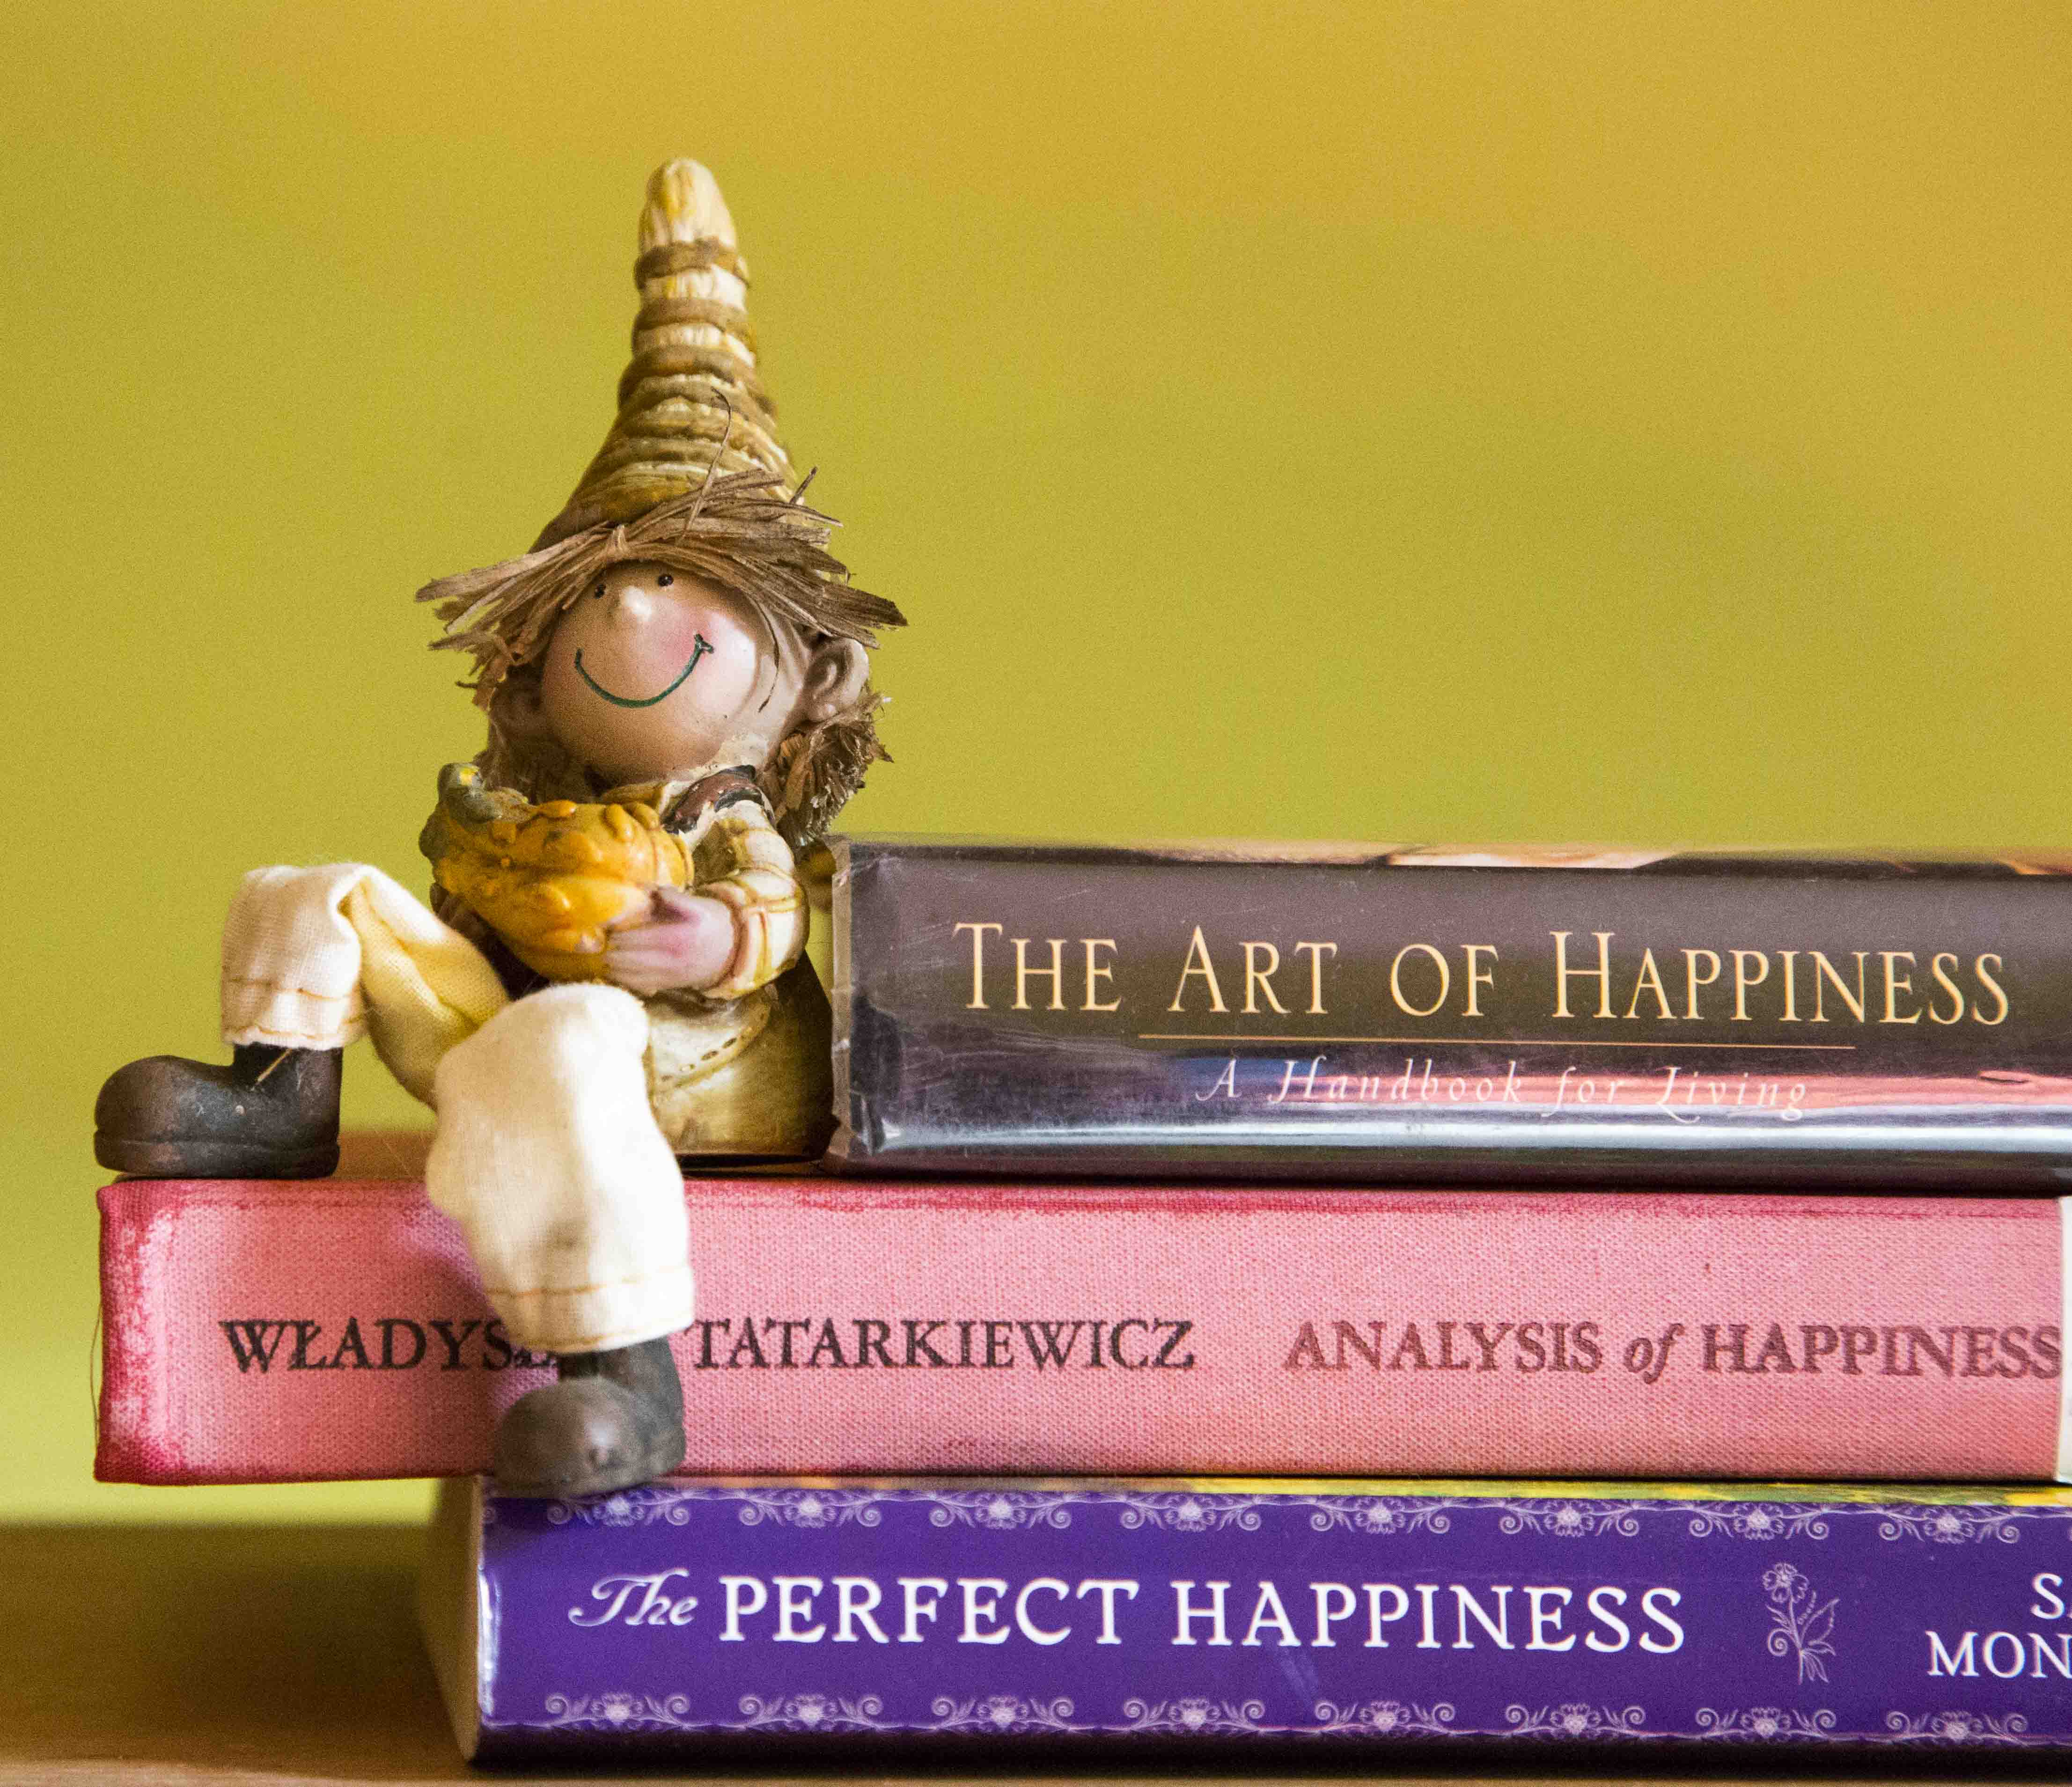 Smily with books on happiness